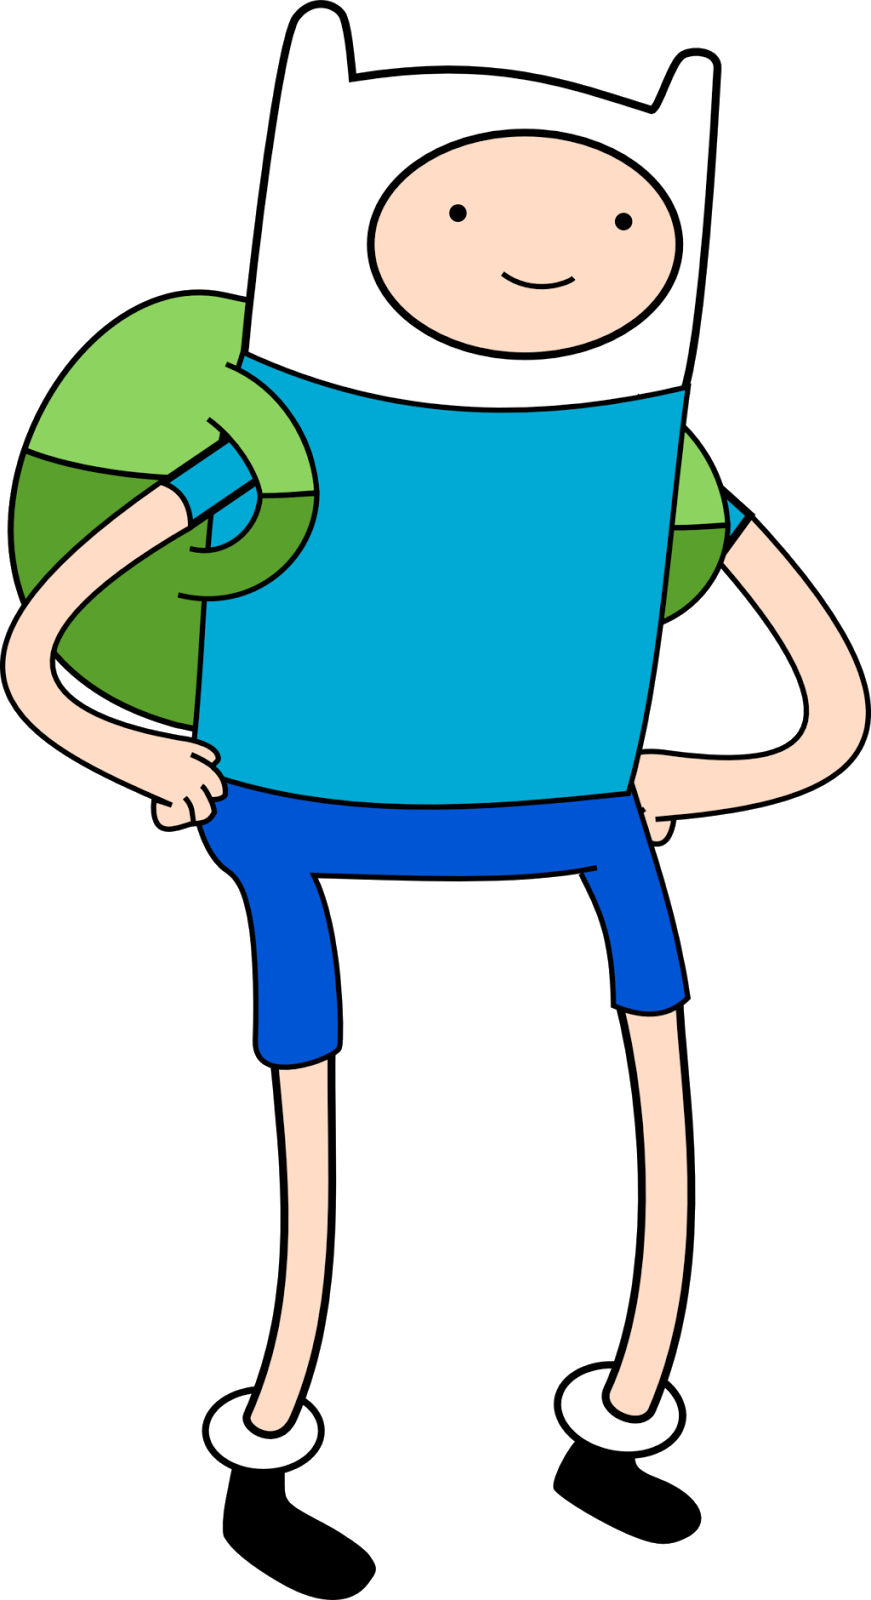 Finn the human Adventure Time Cartoon Characters PNG